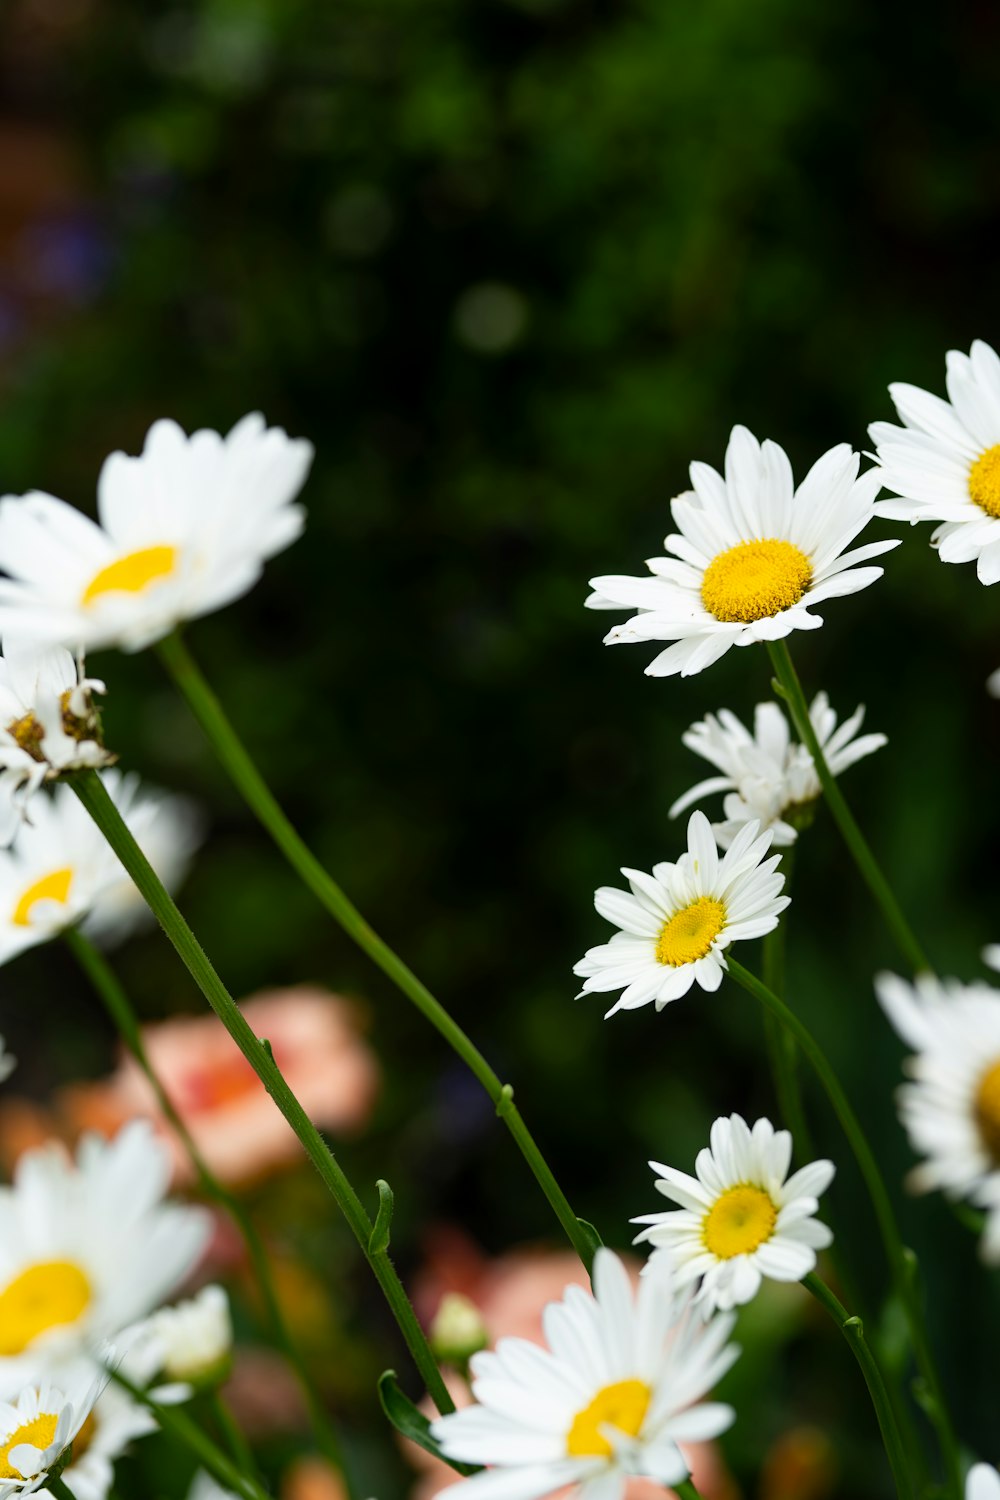 a bunch of white daisies with yellow centers